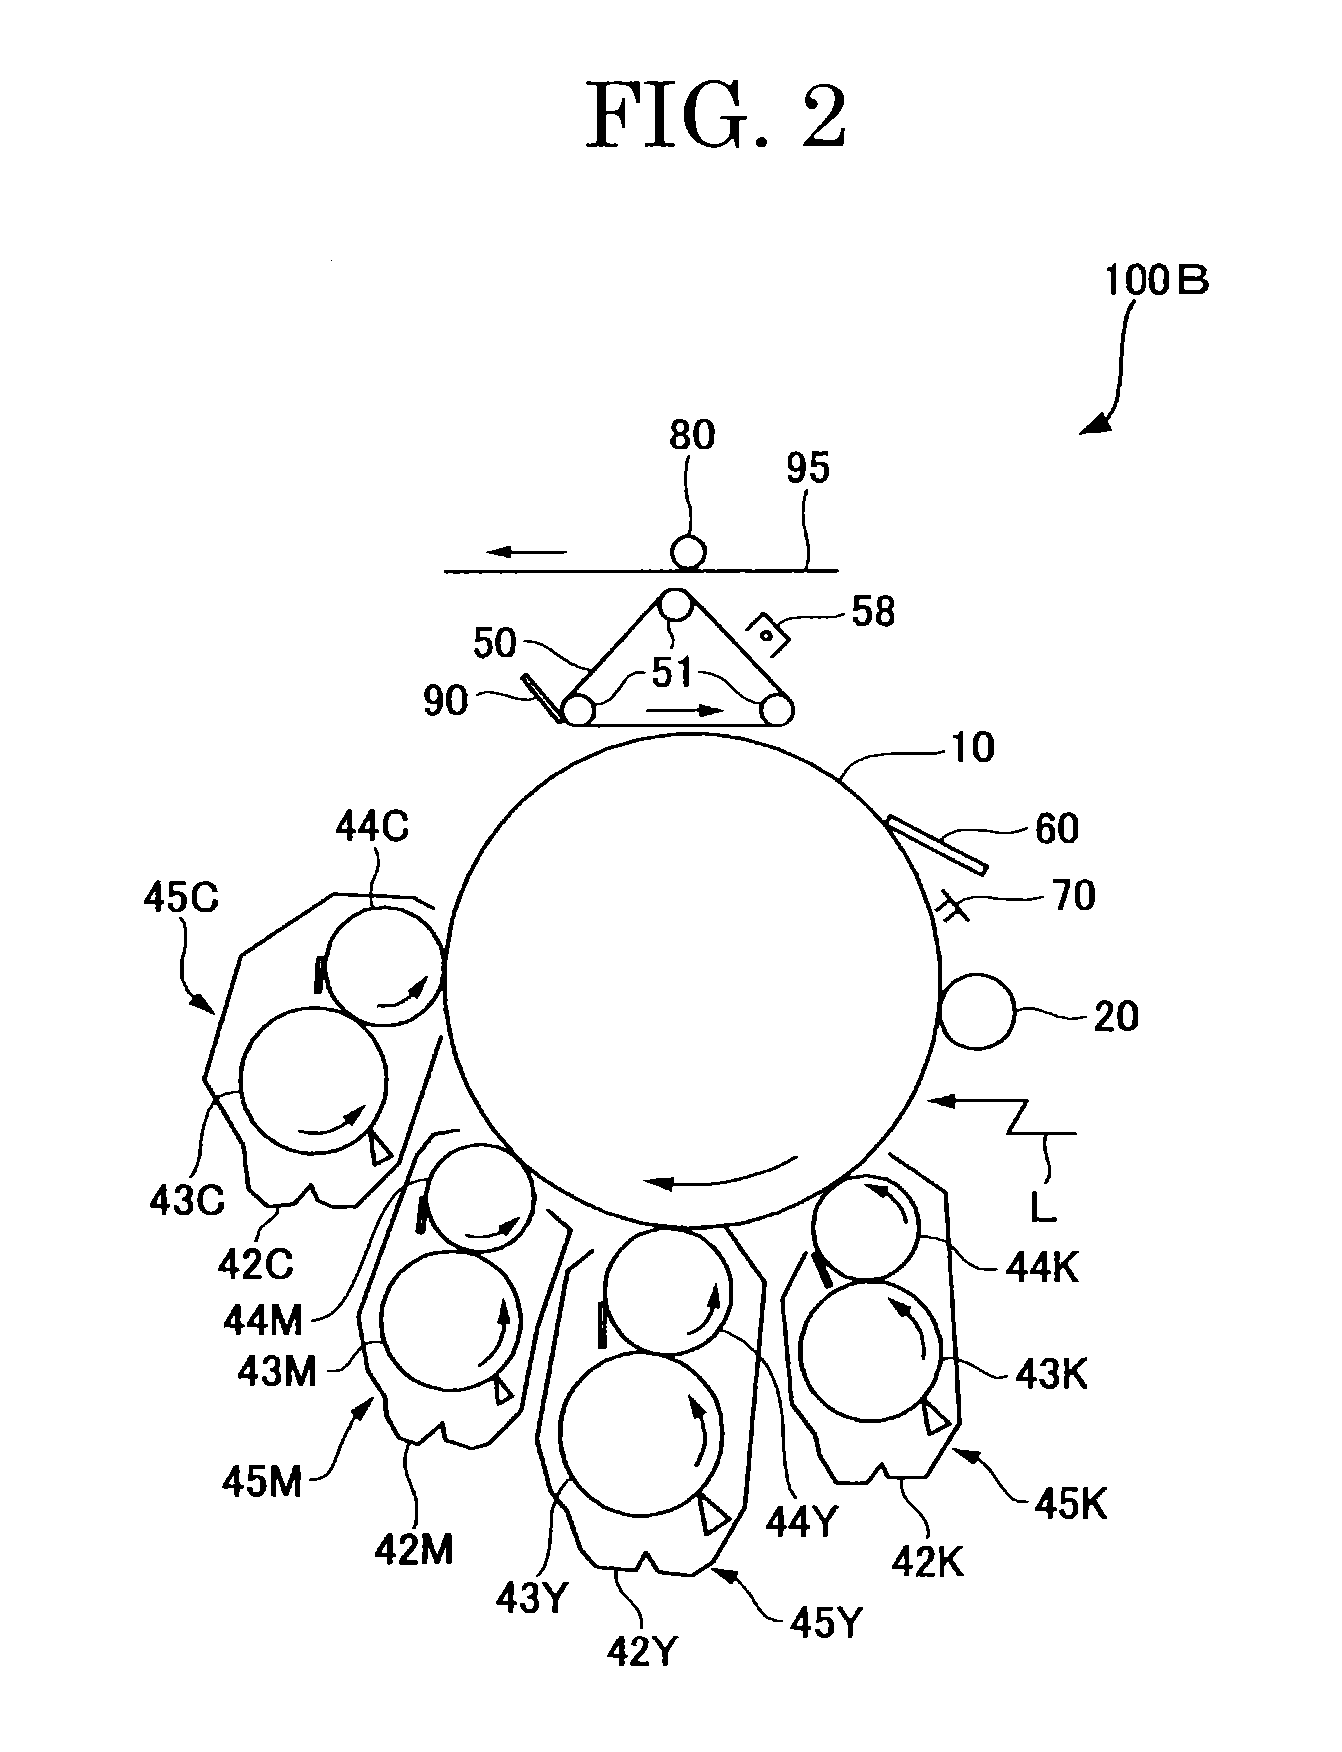 Toner, developer and image forming apparatus